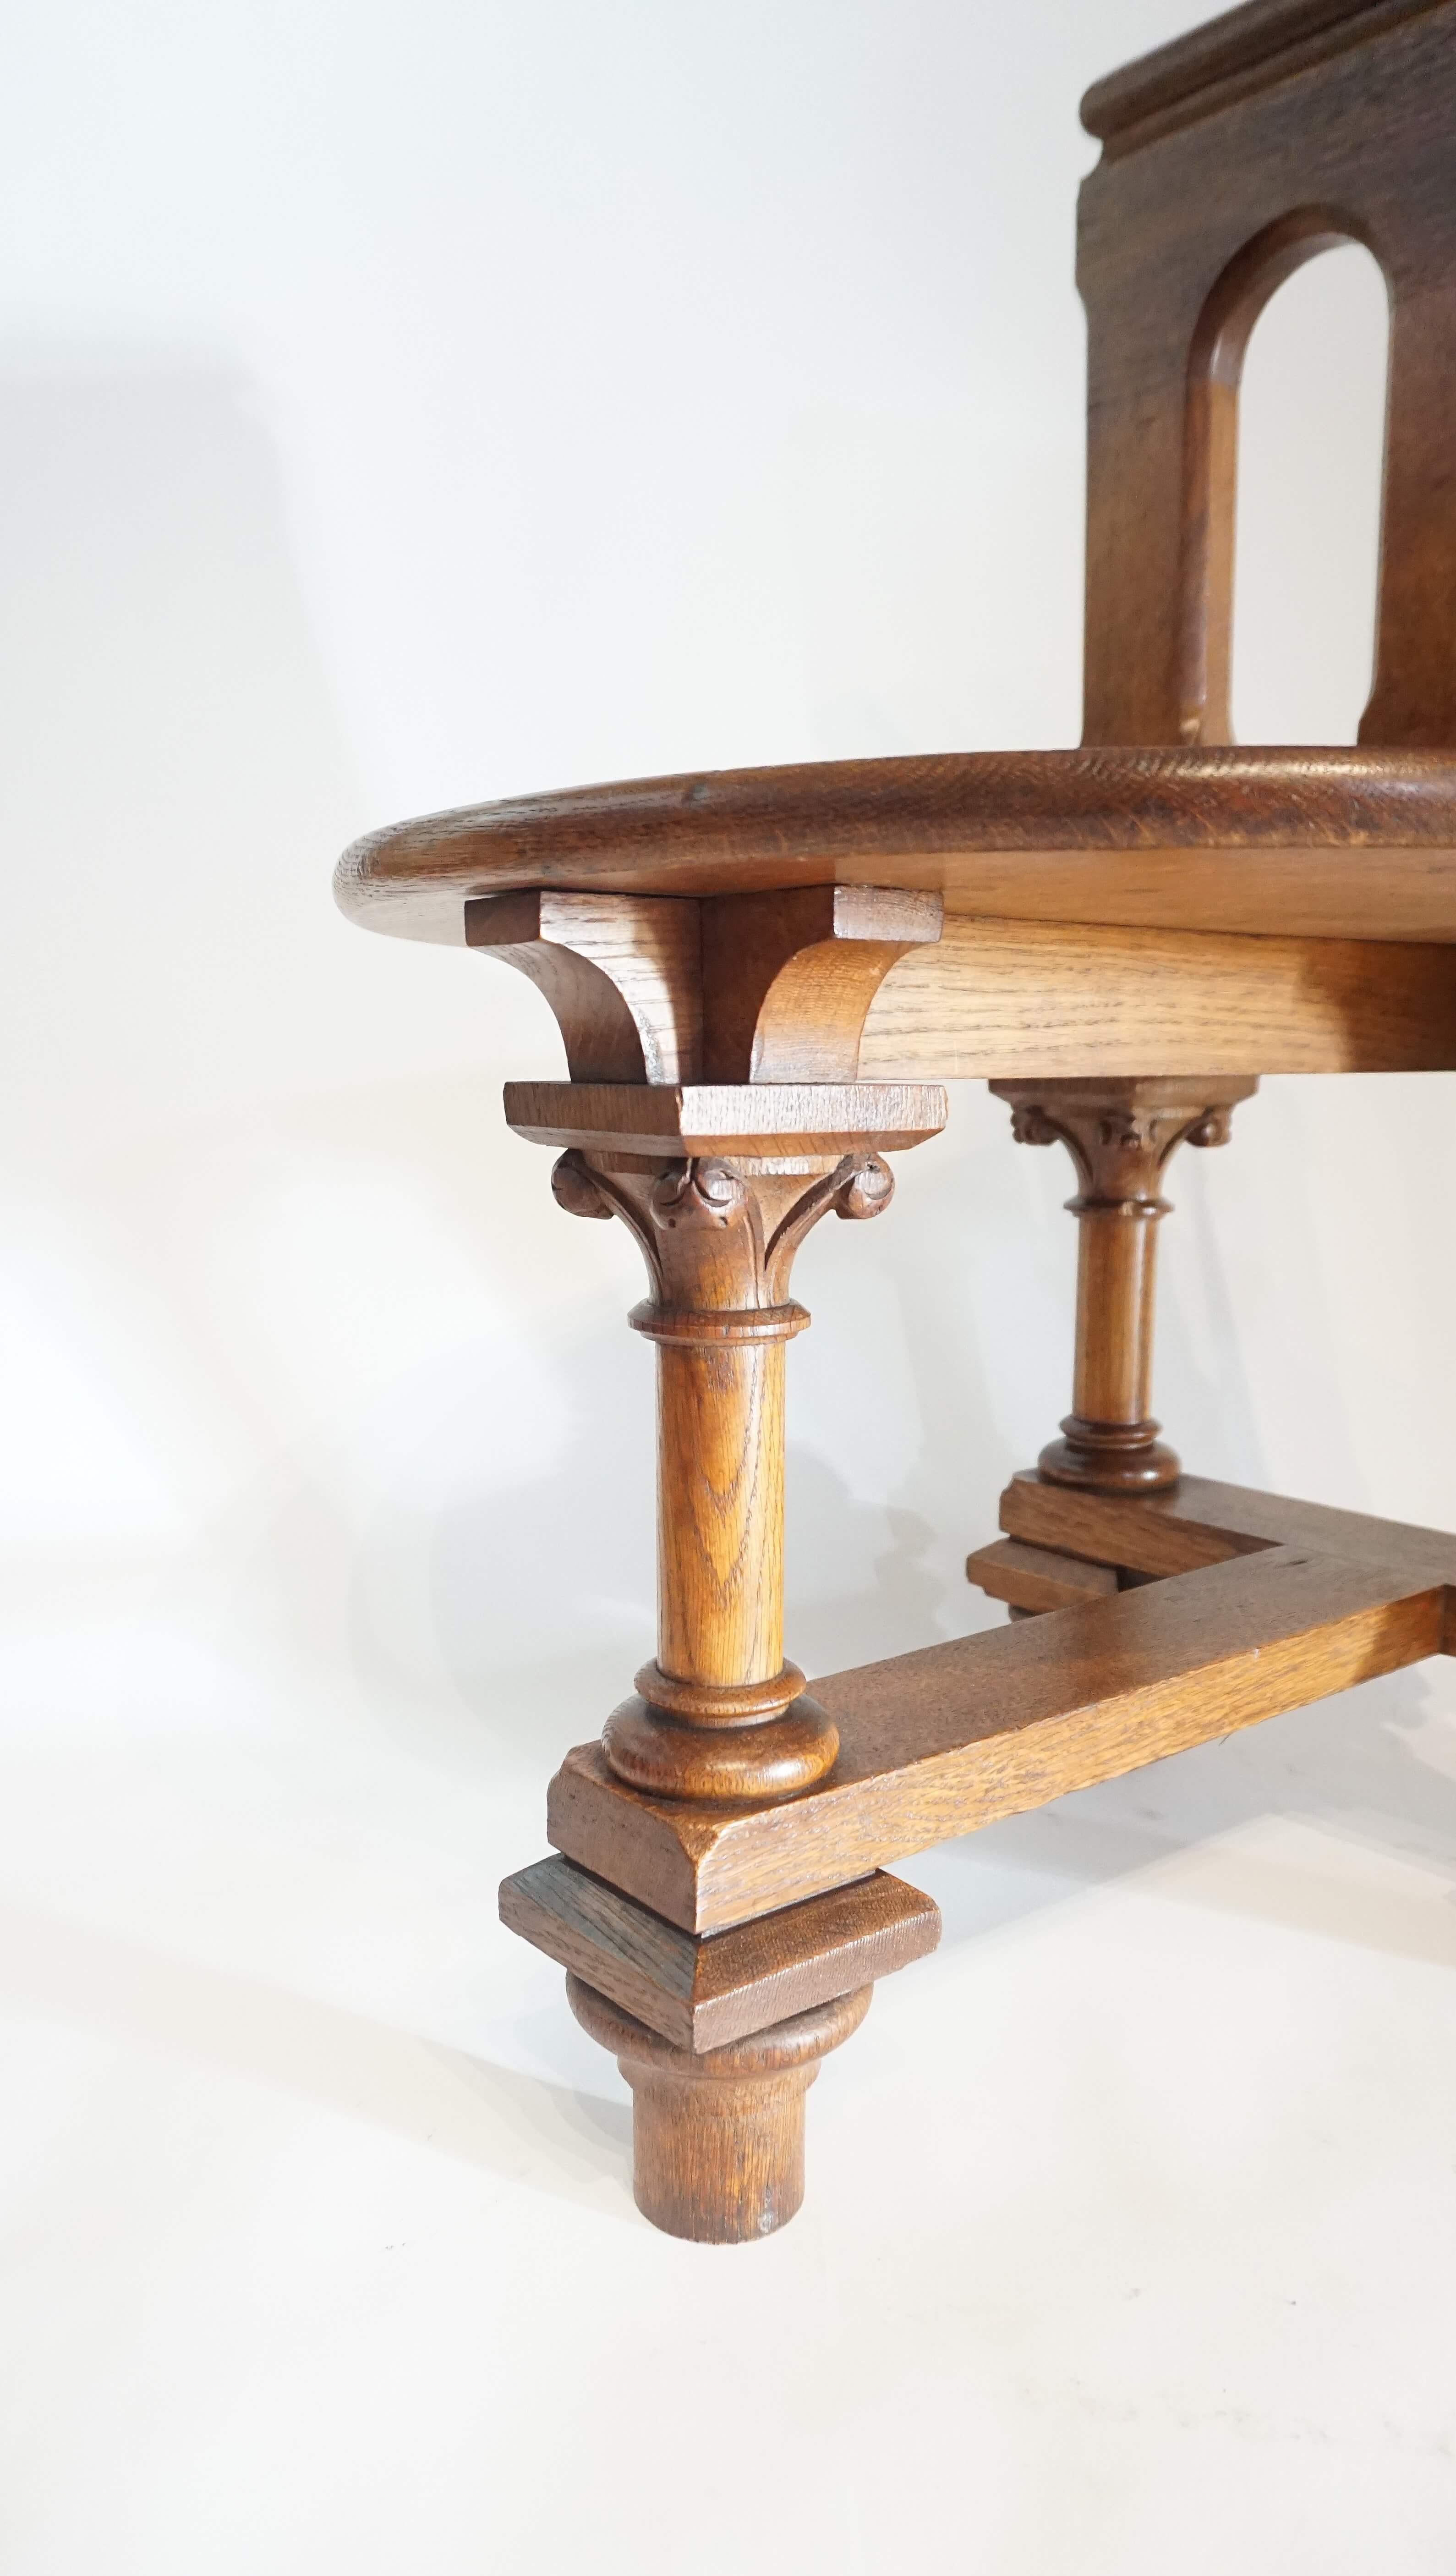 French Romanesque Revival Oak Hall Seats or Chairs, circa 1900 For Sale 3